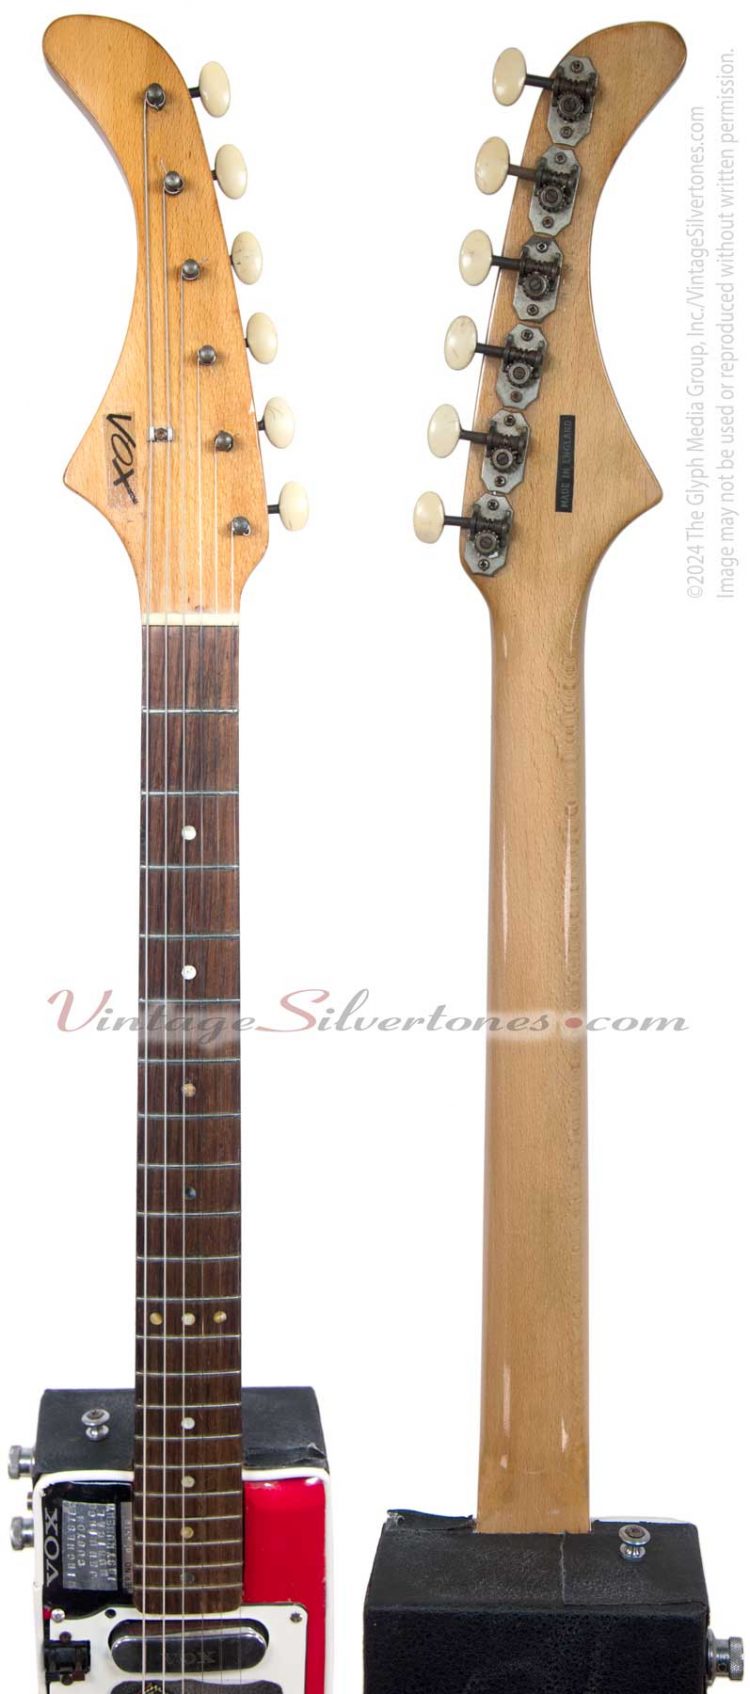 VOX Winchester (formerly Ace/Super Ace) electric guitar - front/back-neck